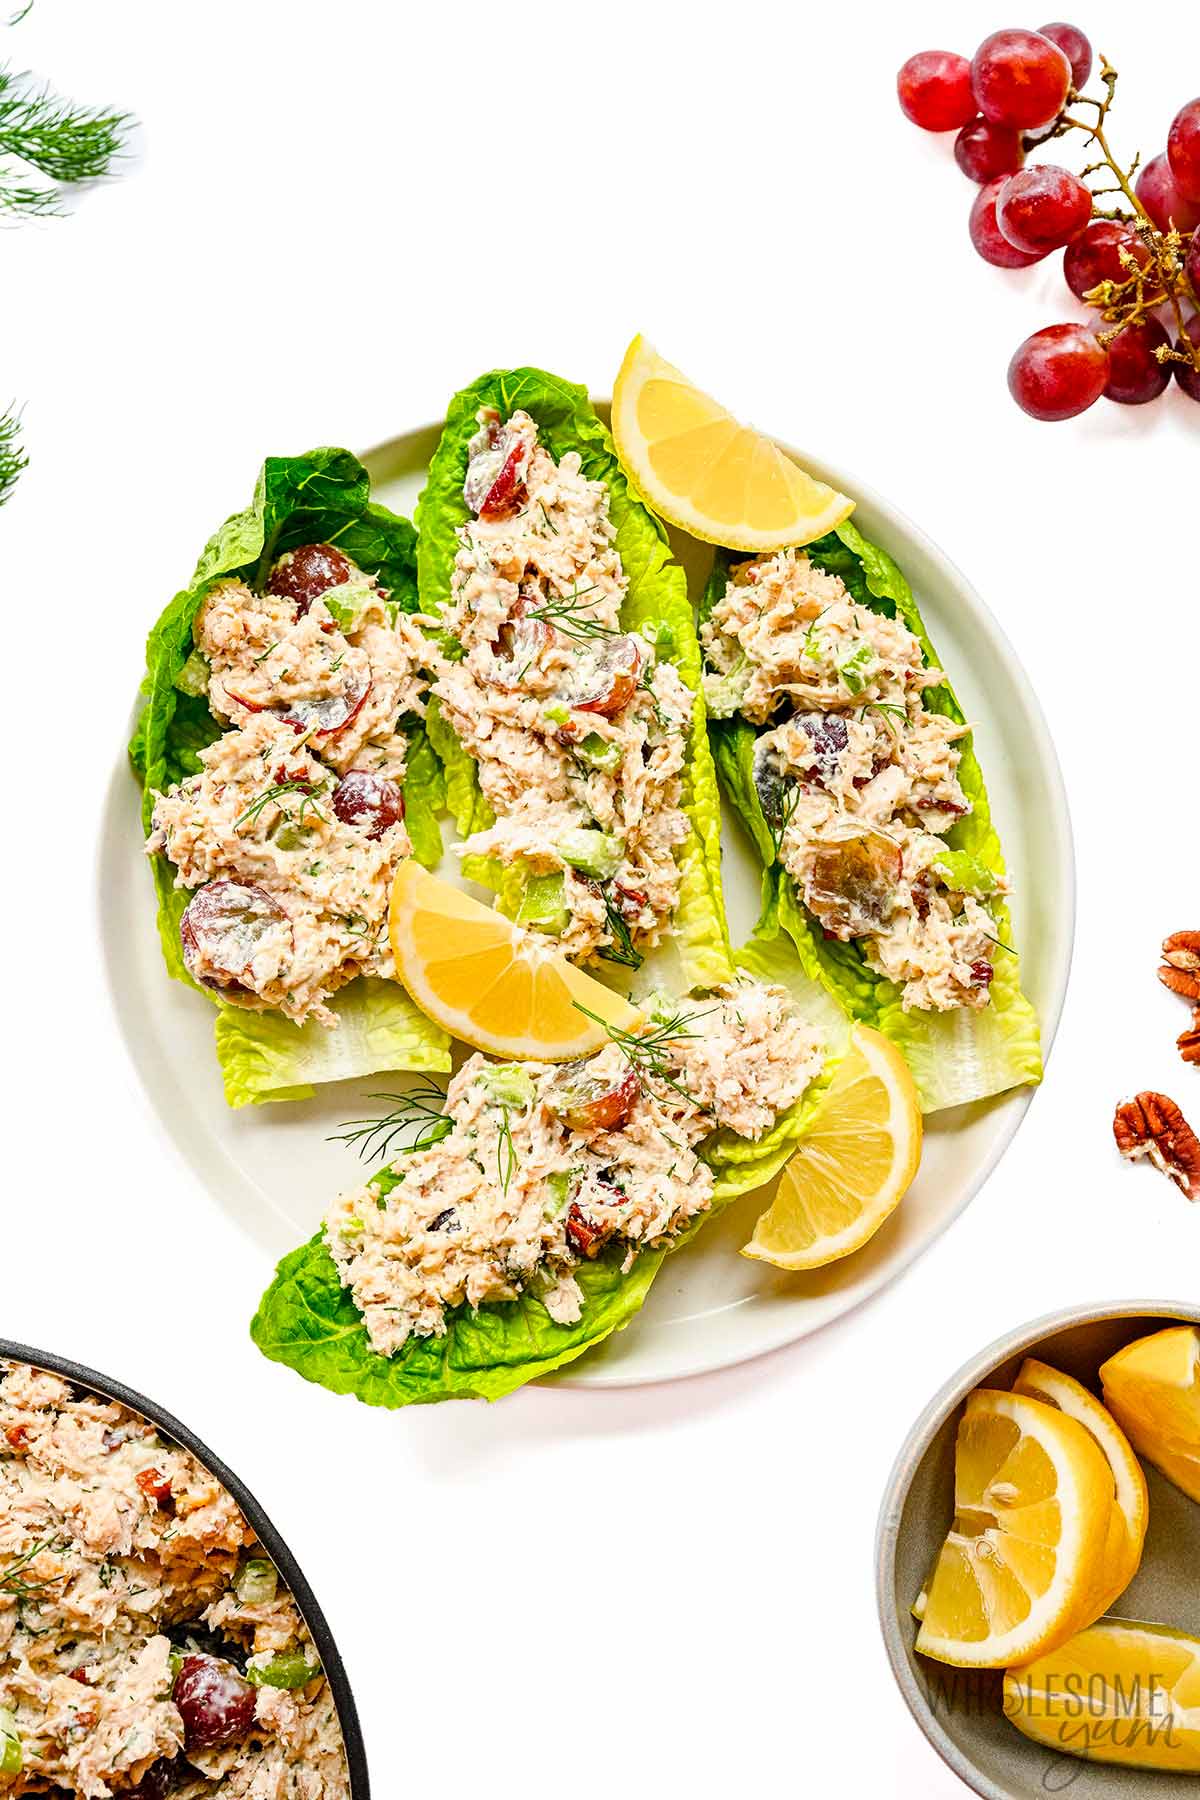 Chicken salad on lettuce leaves on a plate.